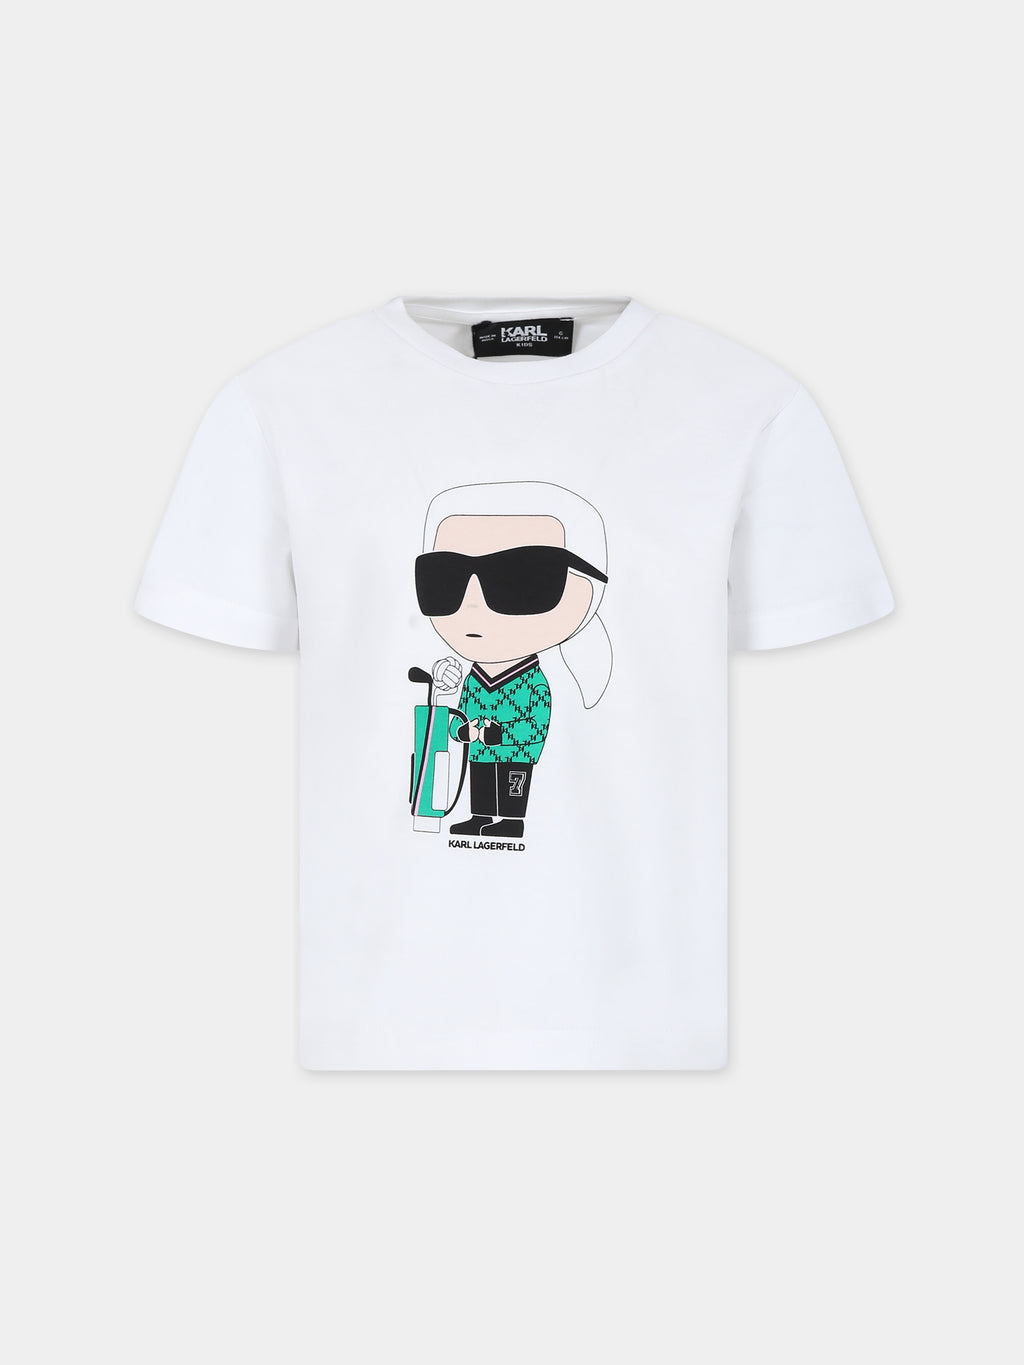 White t-shirt for kids with Karl and golf bag print